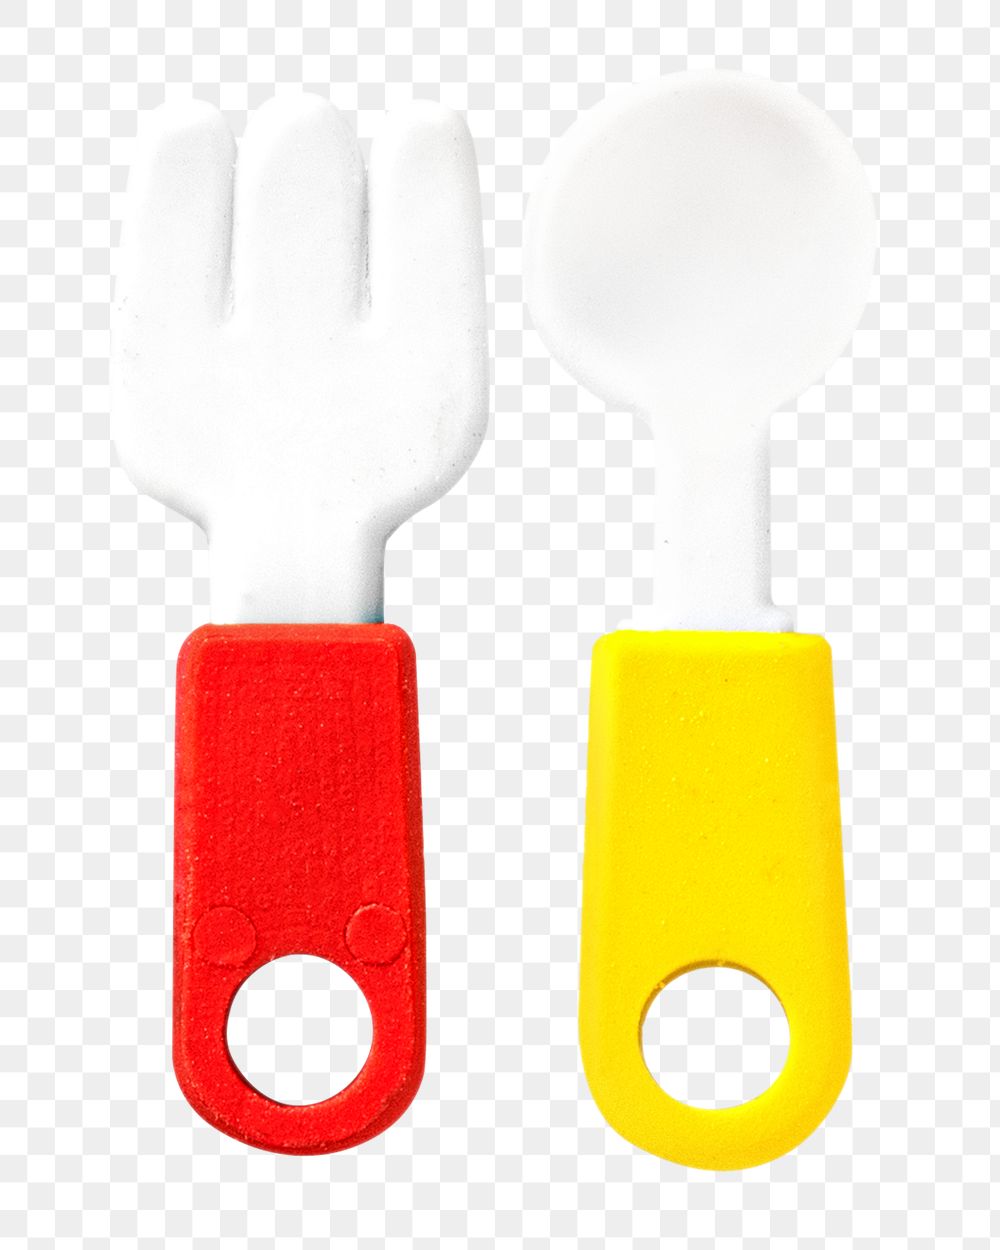 PNG Kitchen and cooking utensil toys, collage element, transparent background.